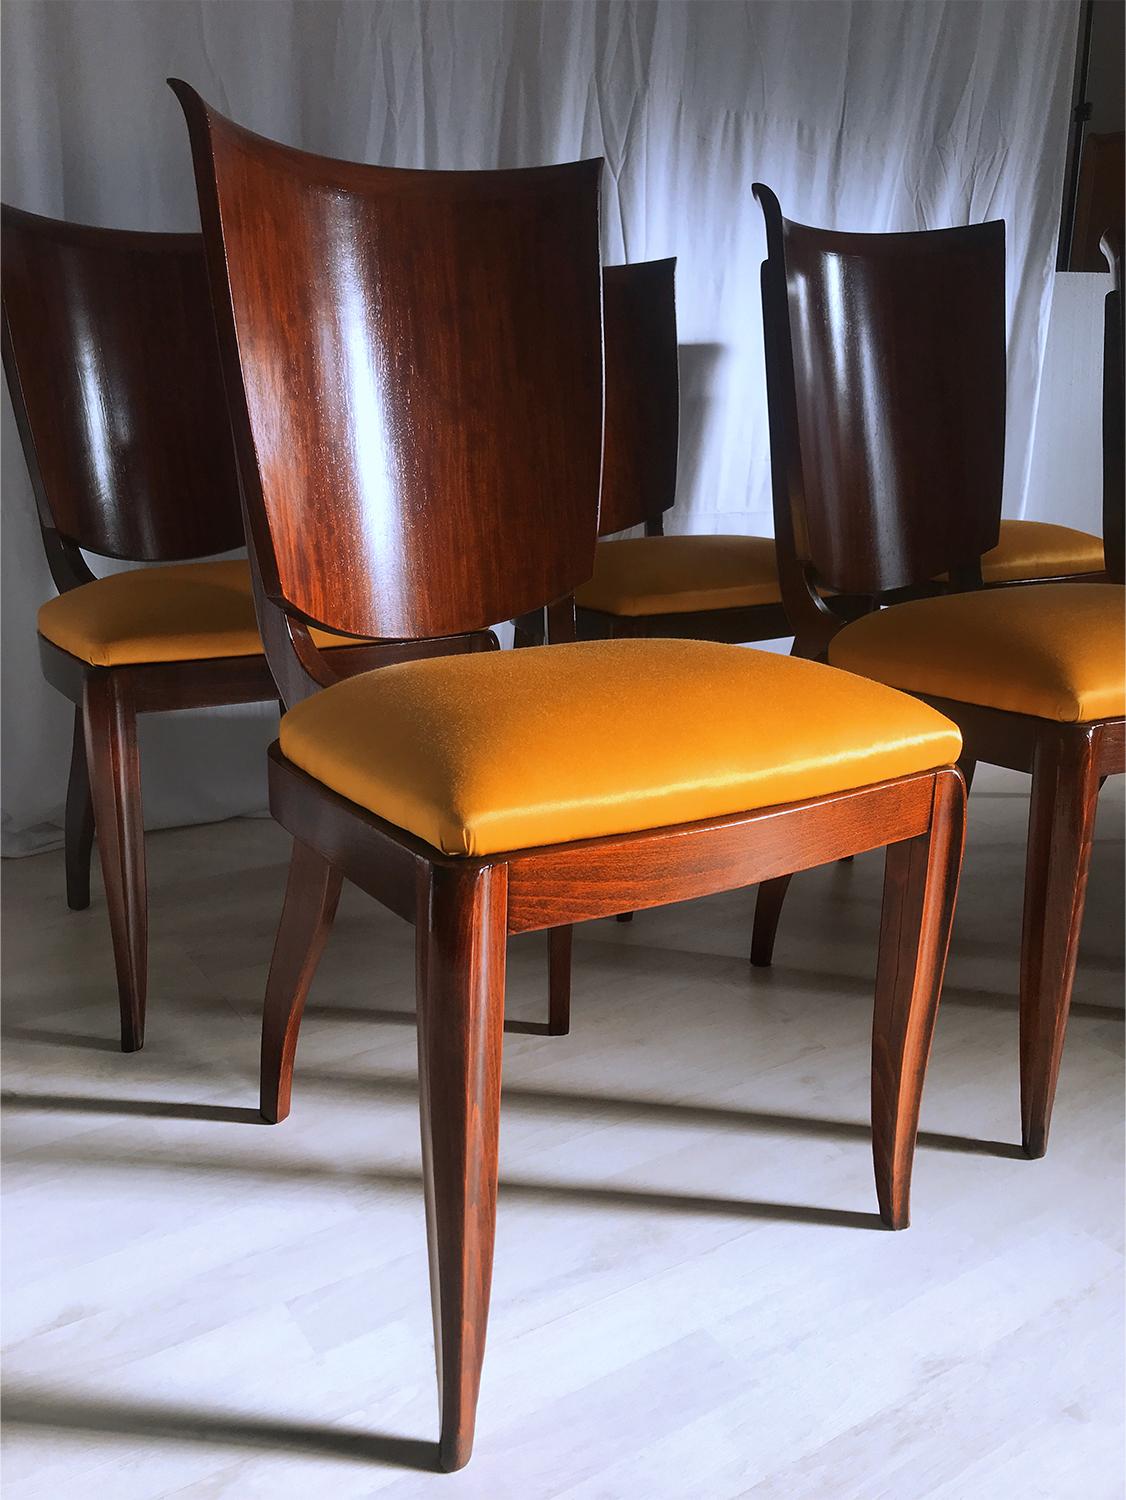 Italian Mid-Century Yellow Dining Chairs by Vittorio Dassi, Set of Six, 1950s For Sale 3